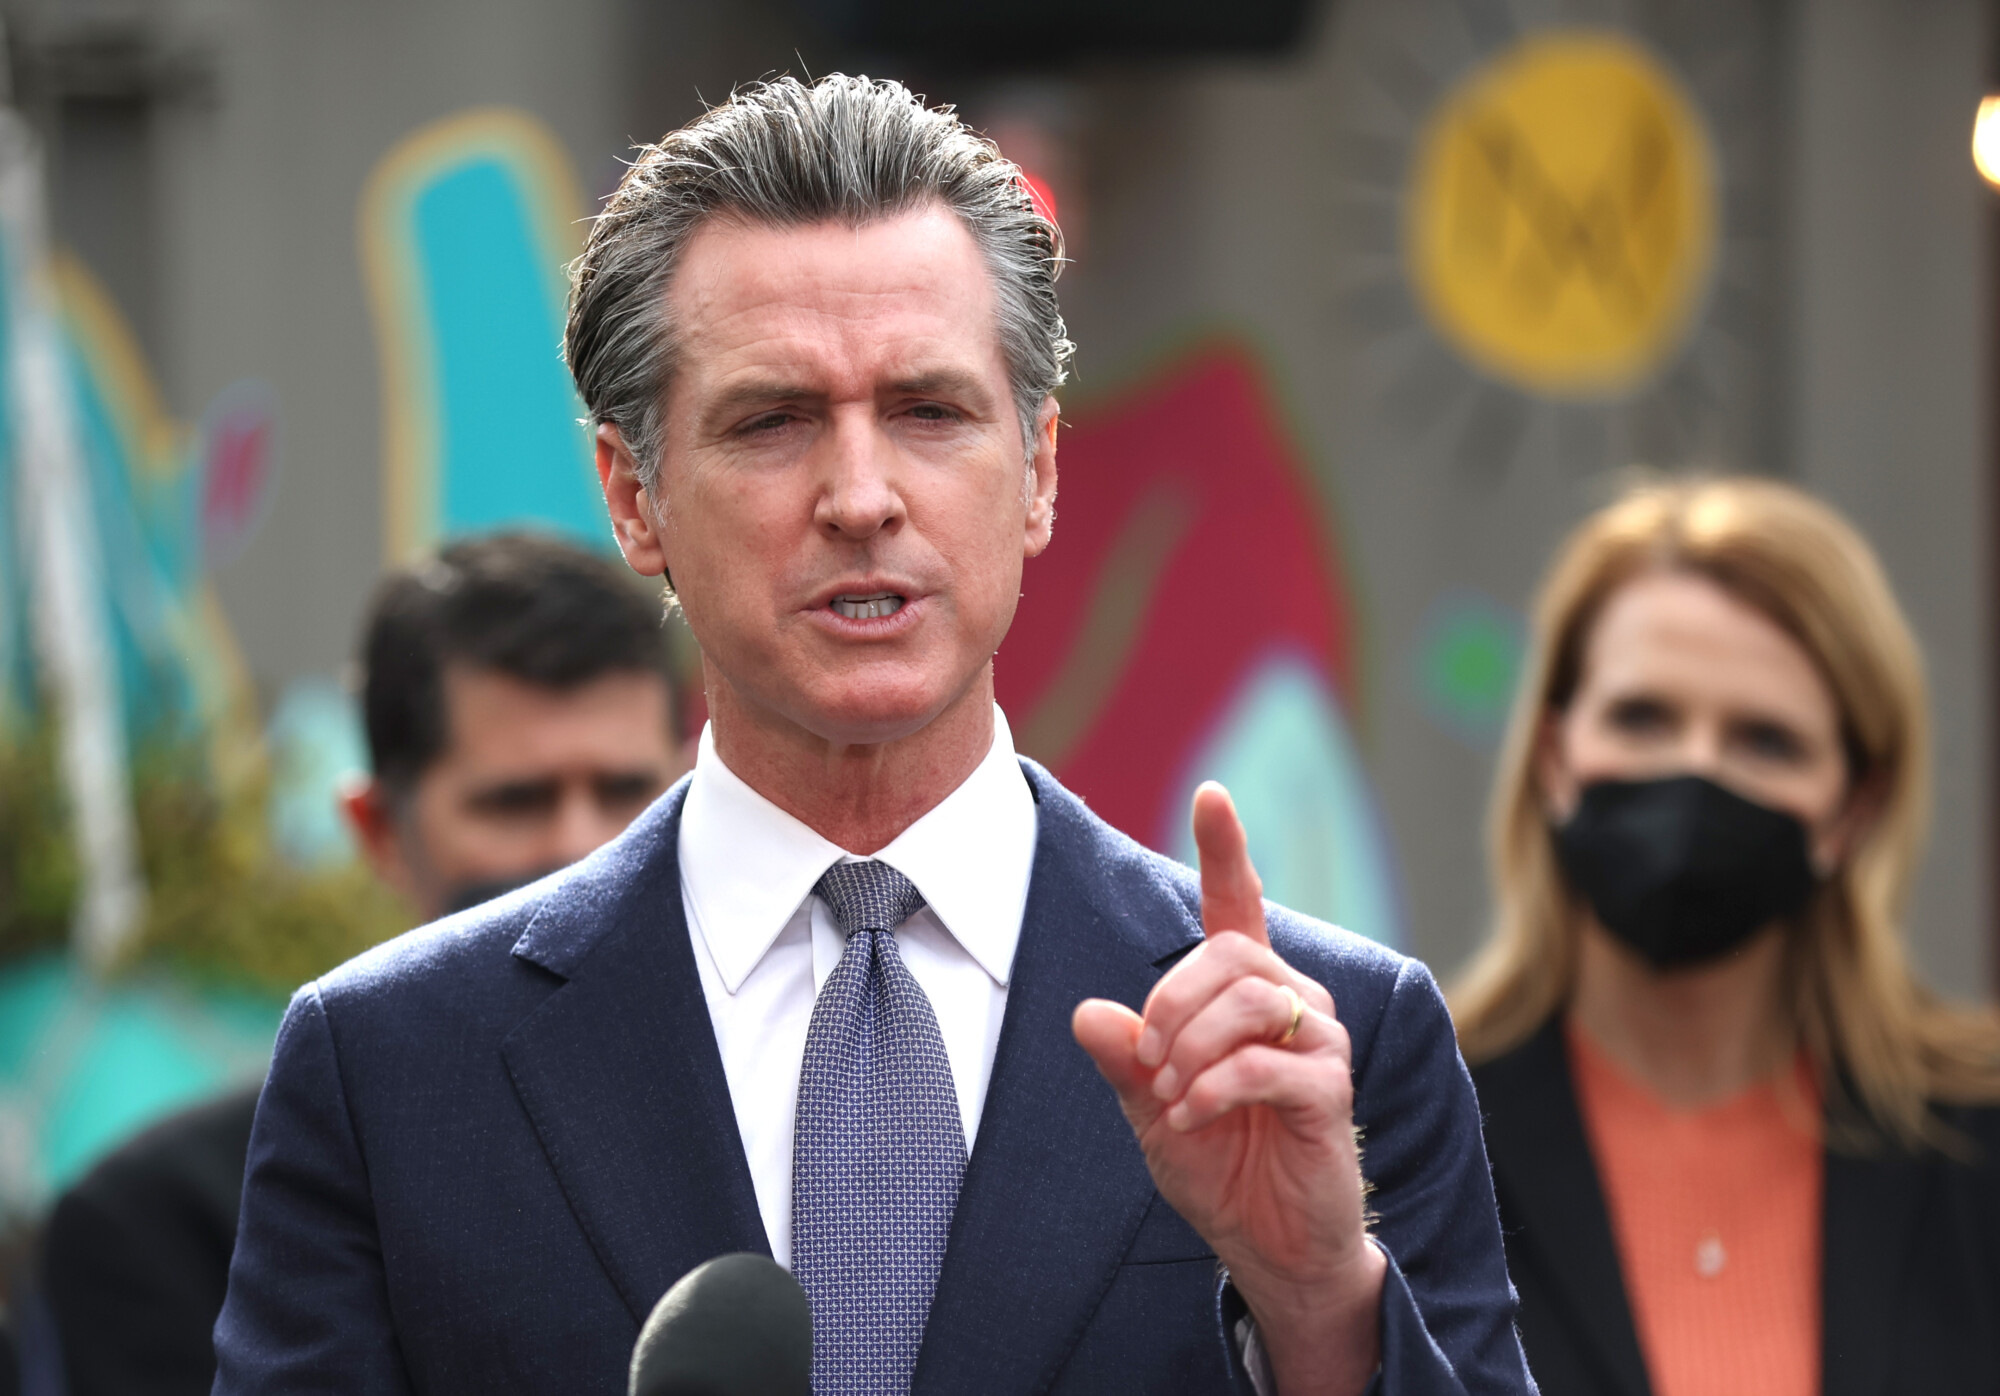 Newsom Signs Package of Abortion Laws That Critics Decry as Enabling Infanticide